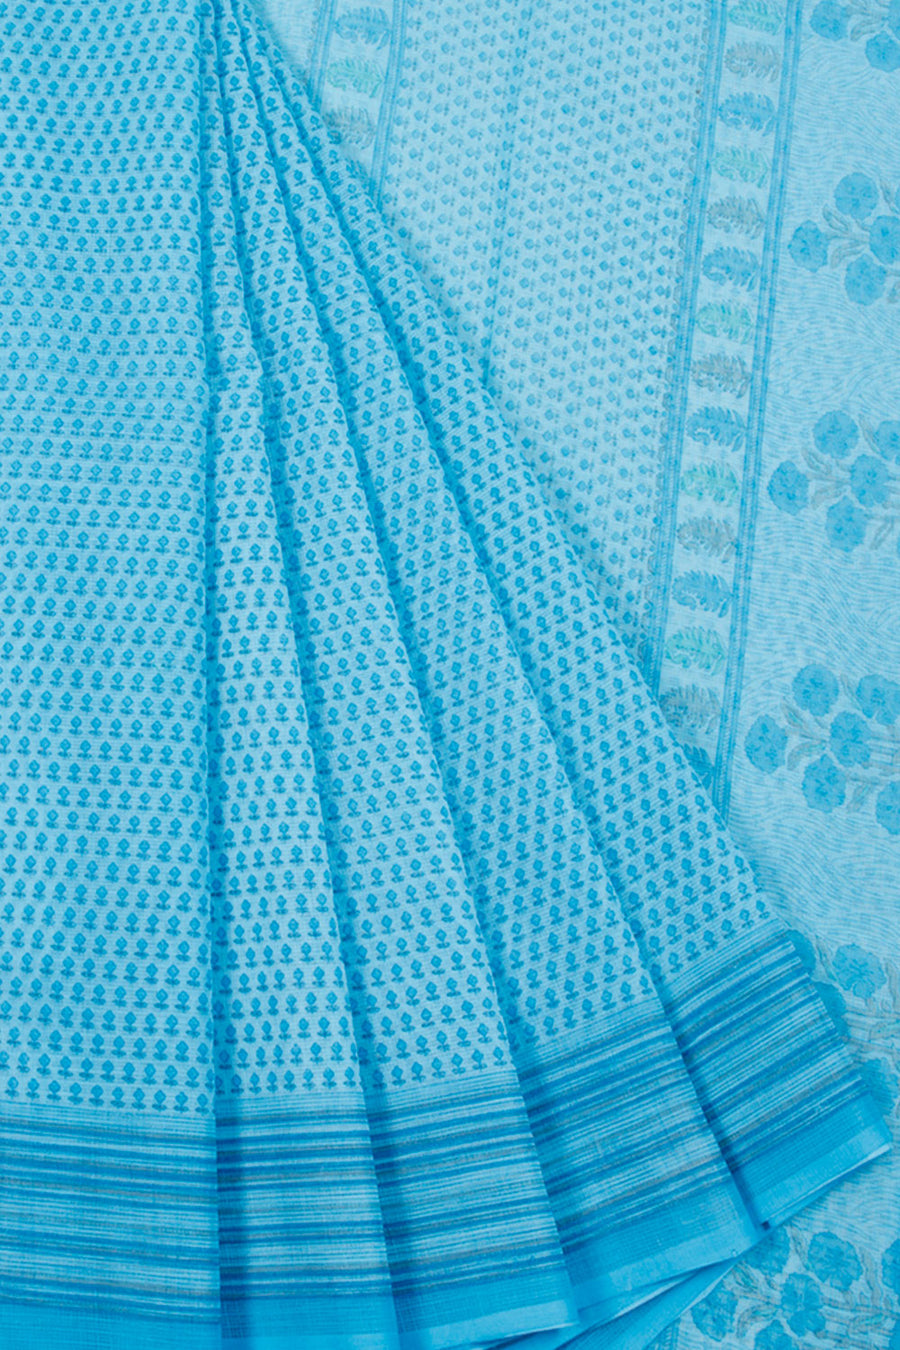 Blue Hand Block Printed Kota Cotton Saree with allover Floral Design, Floral Pallu and without Blouse